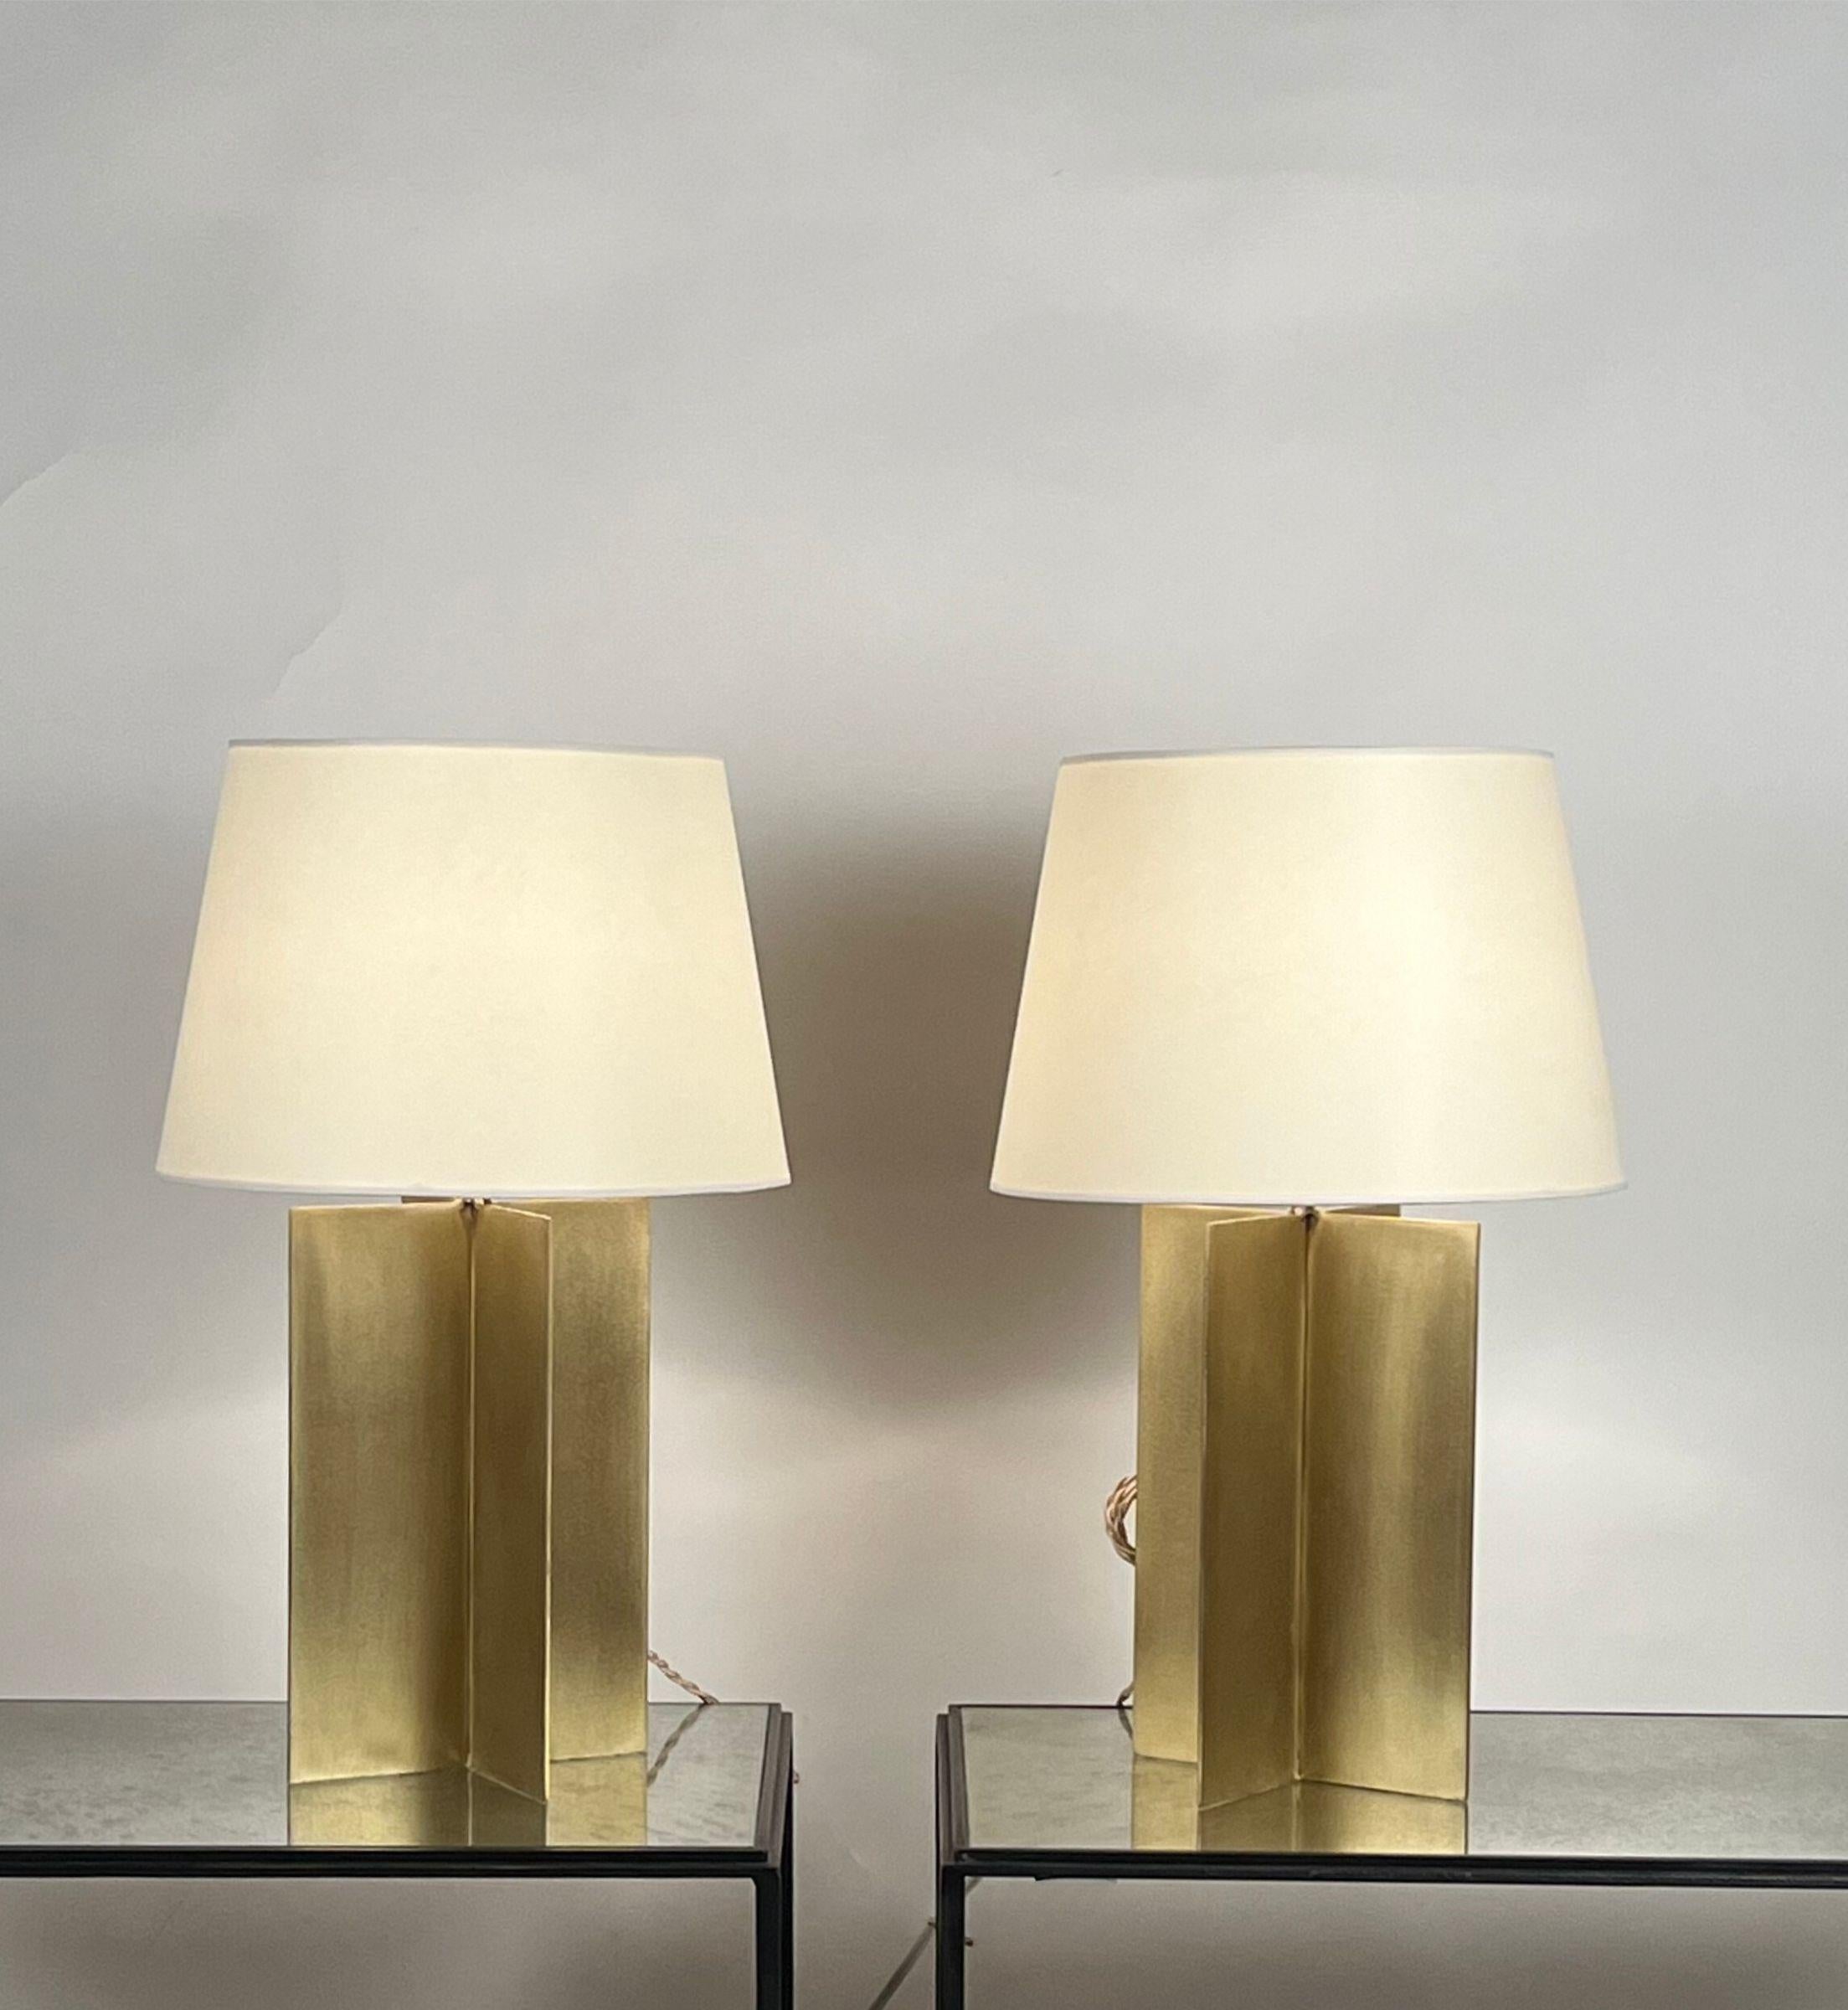 Pair of large brass 'Croisillon' table Lamps with parchment shades by Design Frères®.

An attractive, understated combination of brushed solid brass crosspiece bases with a clear coat and European style parchment shades (no harps or